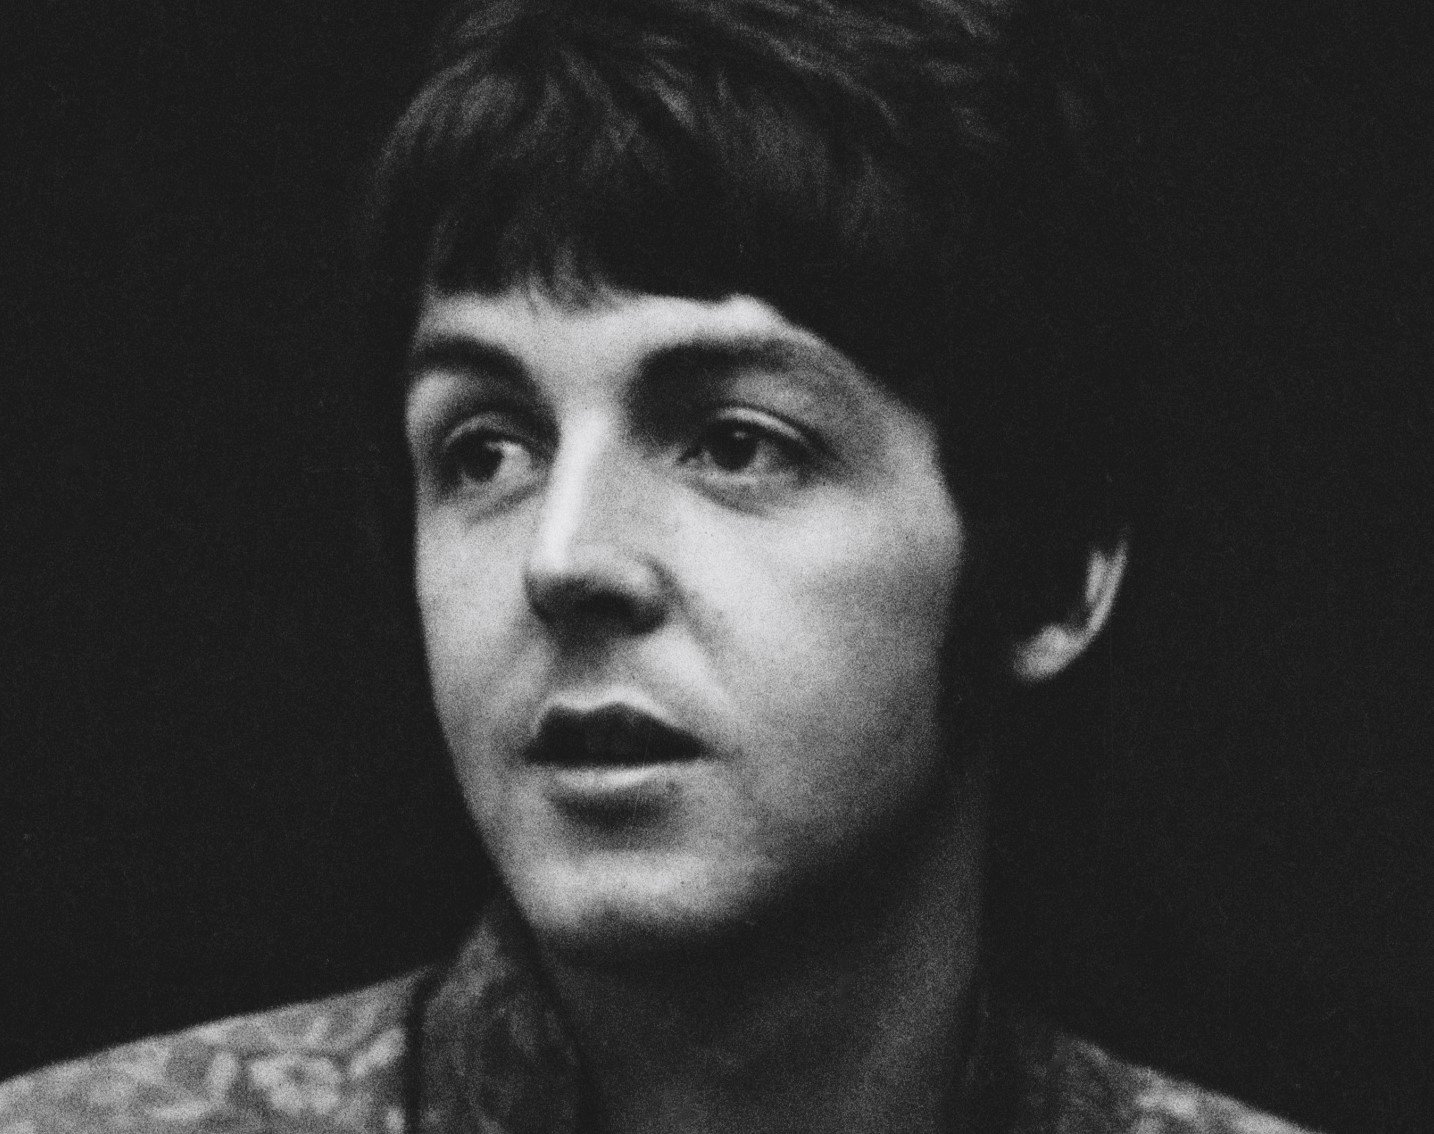 A young Paul McCartney during the "Yesterday" era